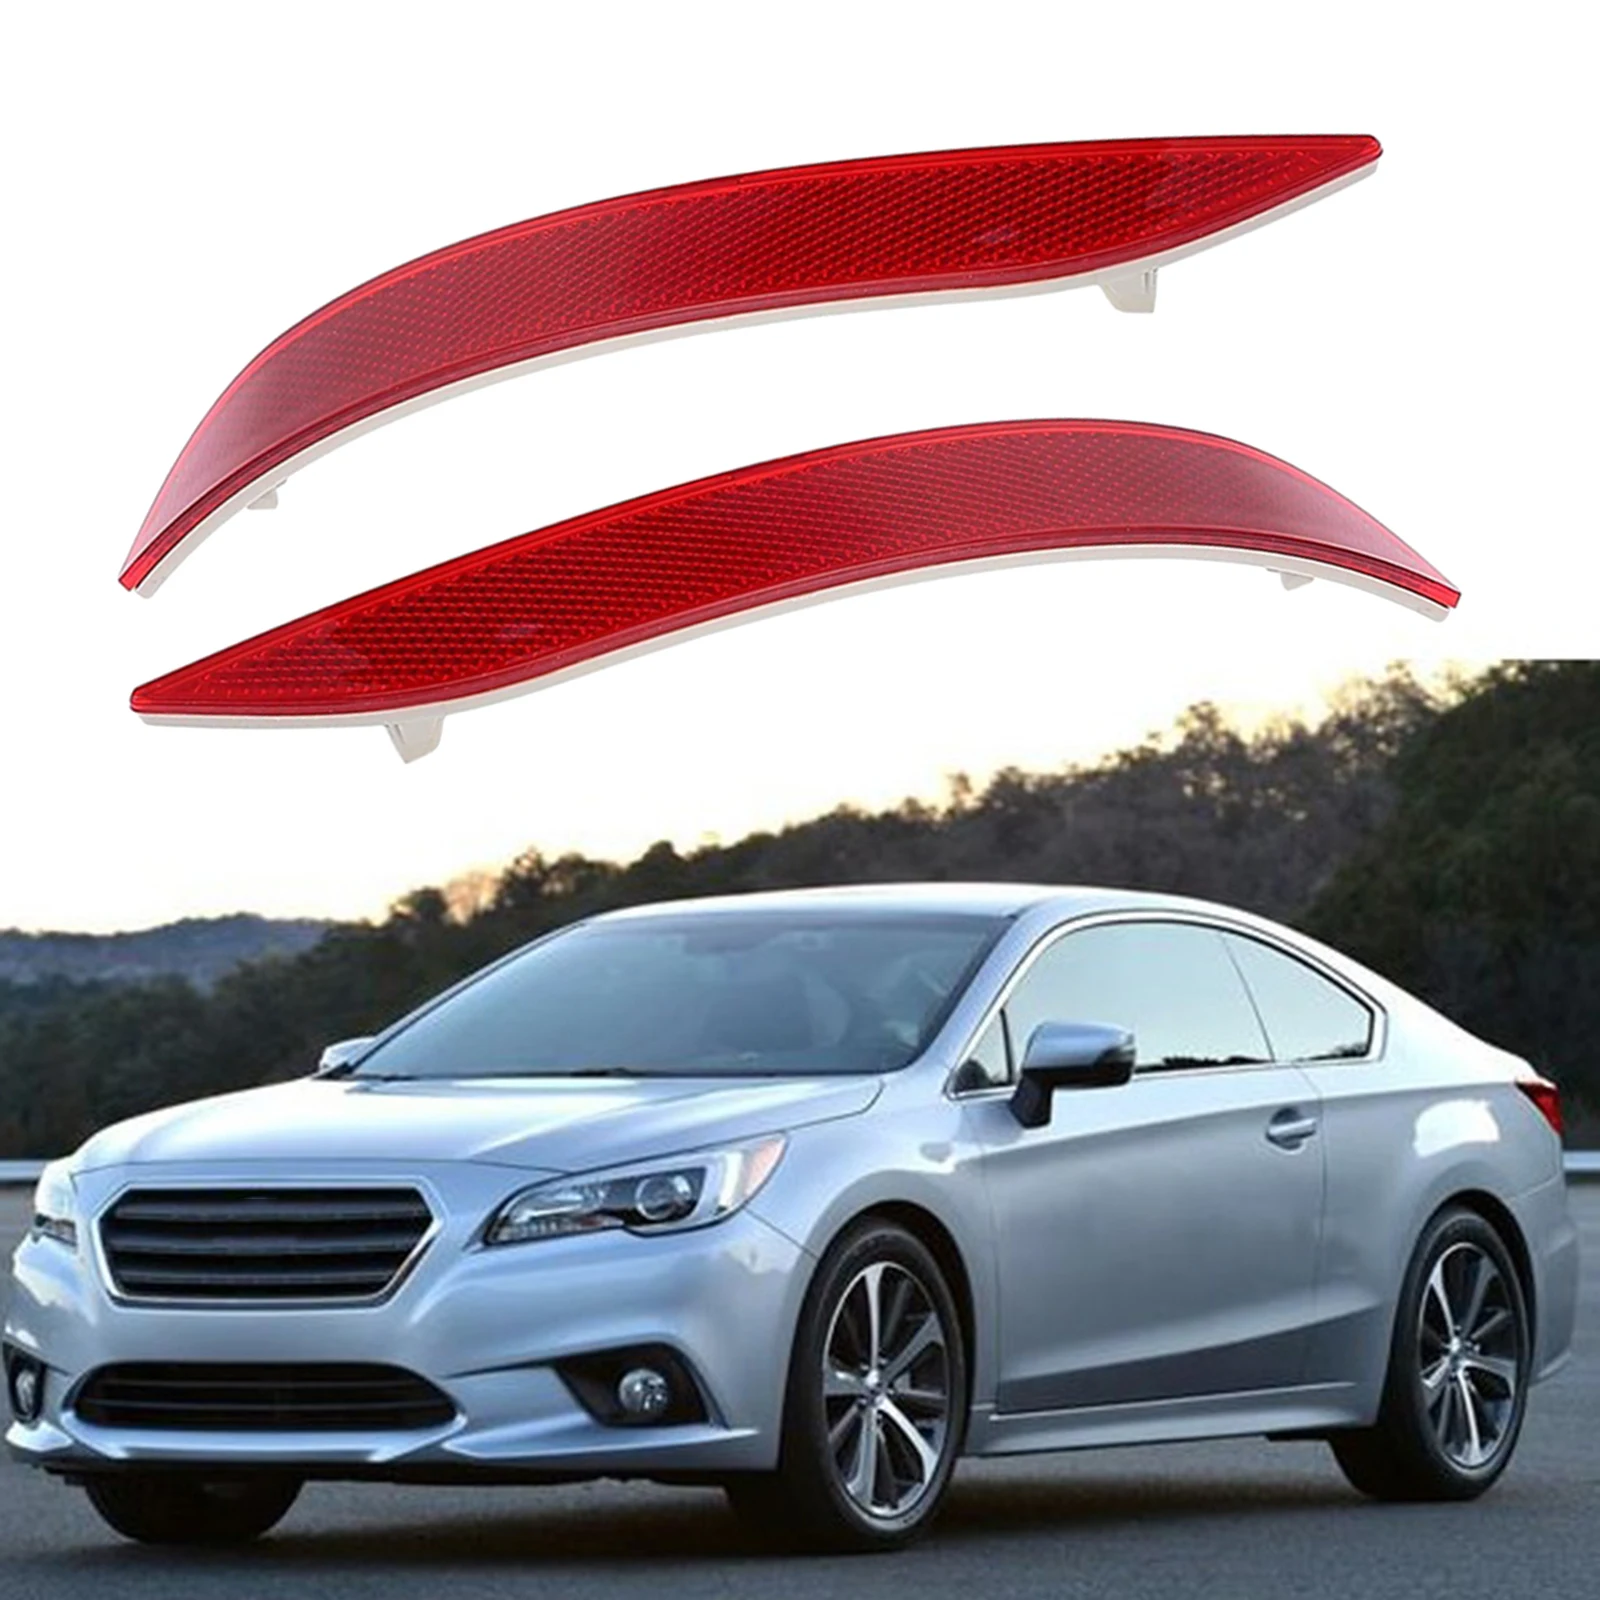 Rear Bumper Reflector Light Left  Strip Lamp for  X1 E84 13-16 Accessories 63147314883 Red Replace